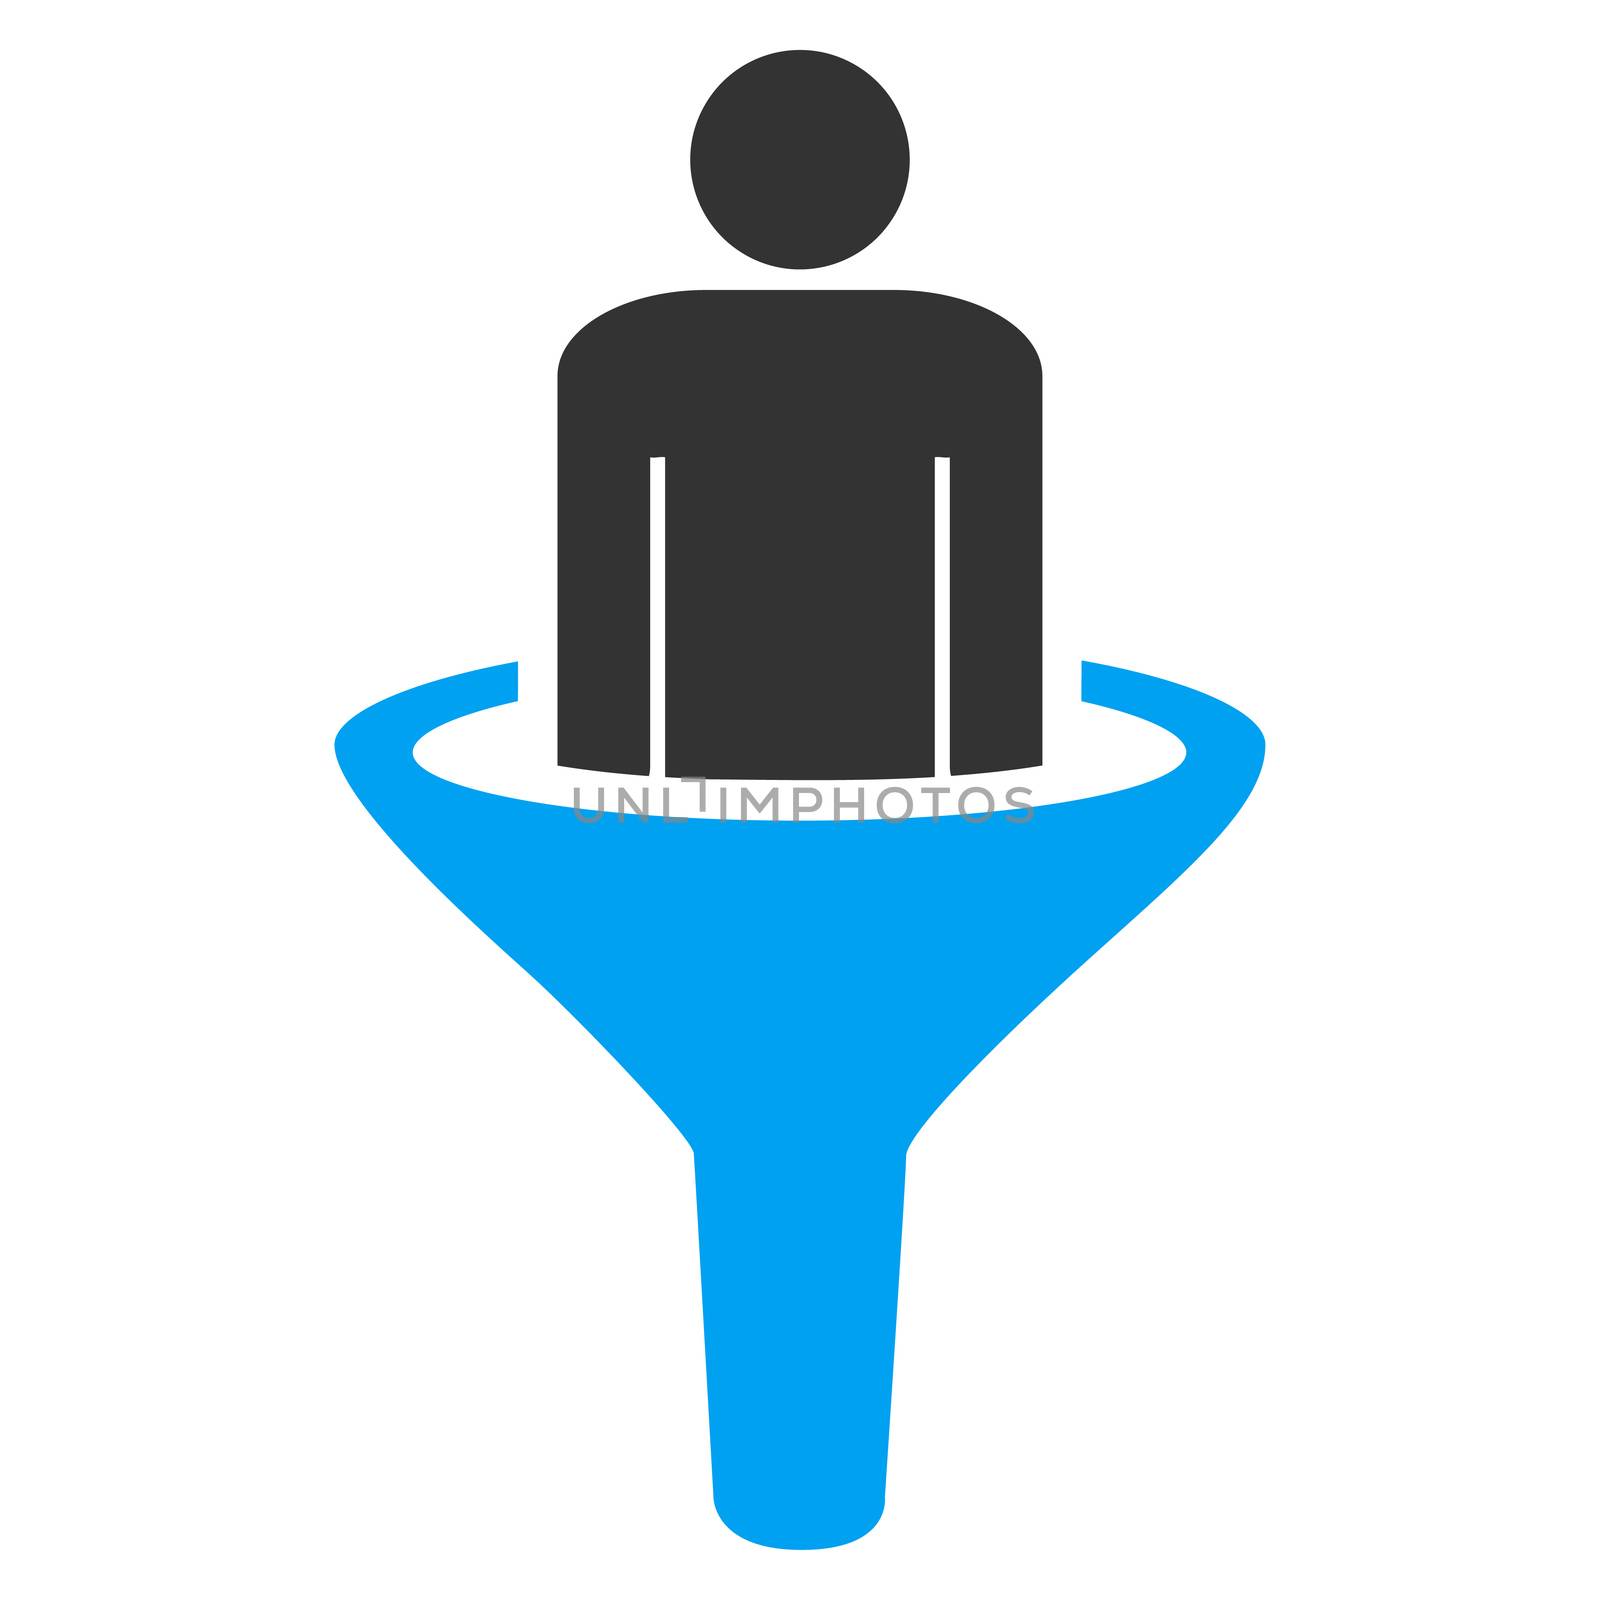 Sales funnel icon from Business Bicolor Set by ahasoft